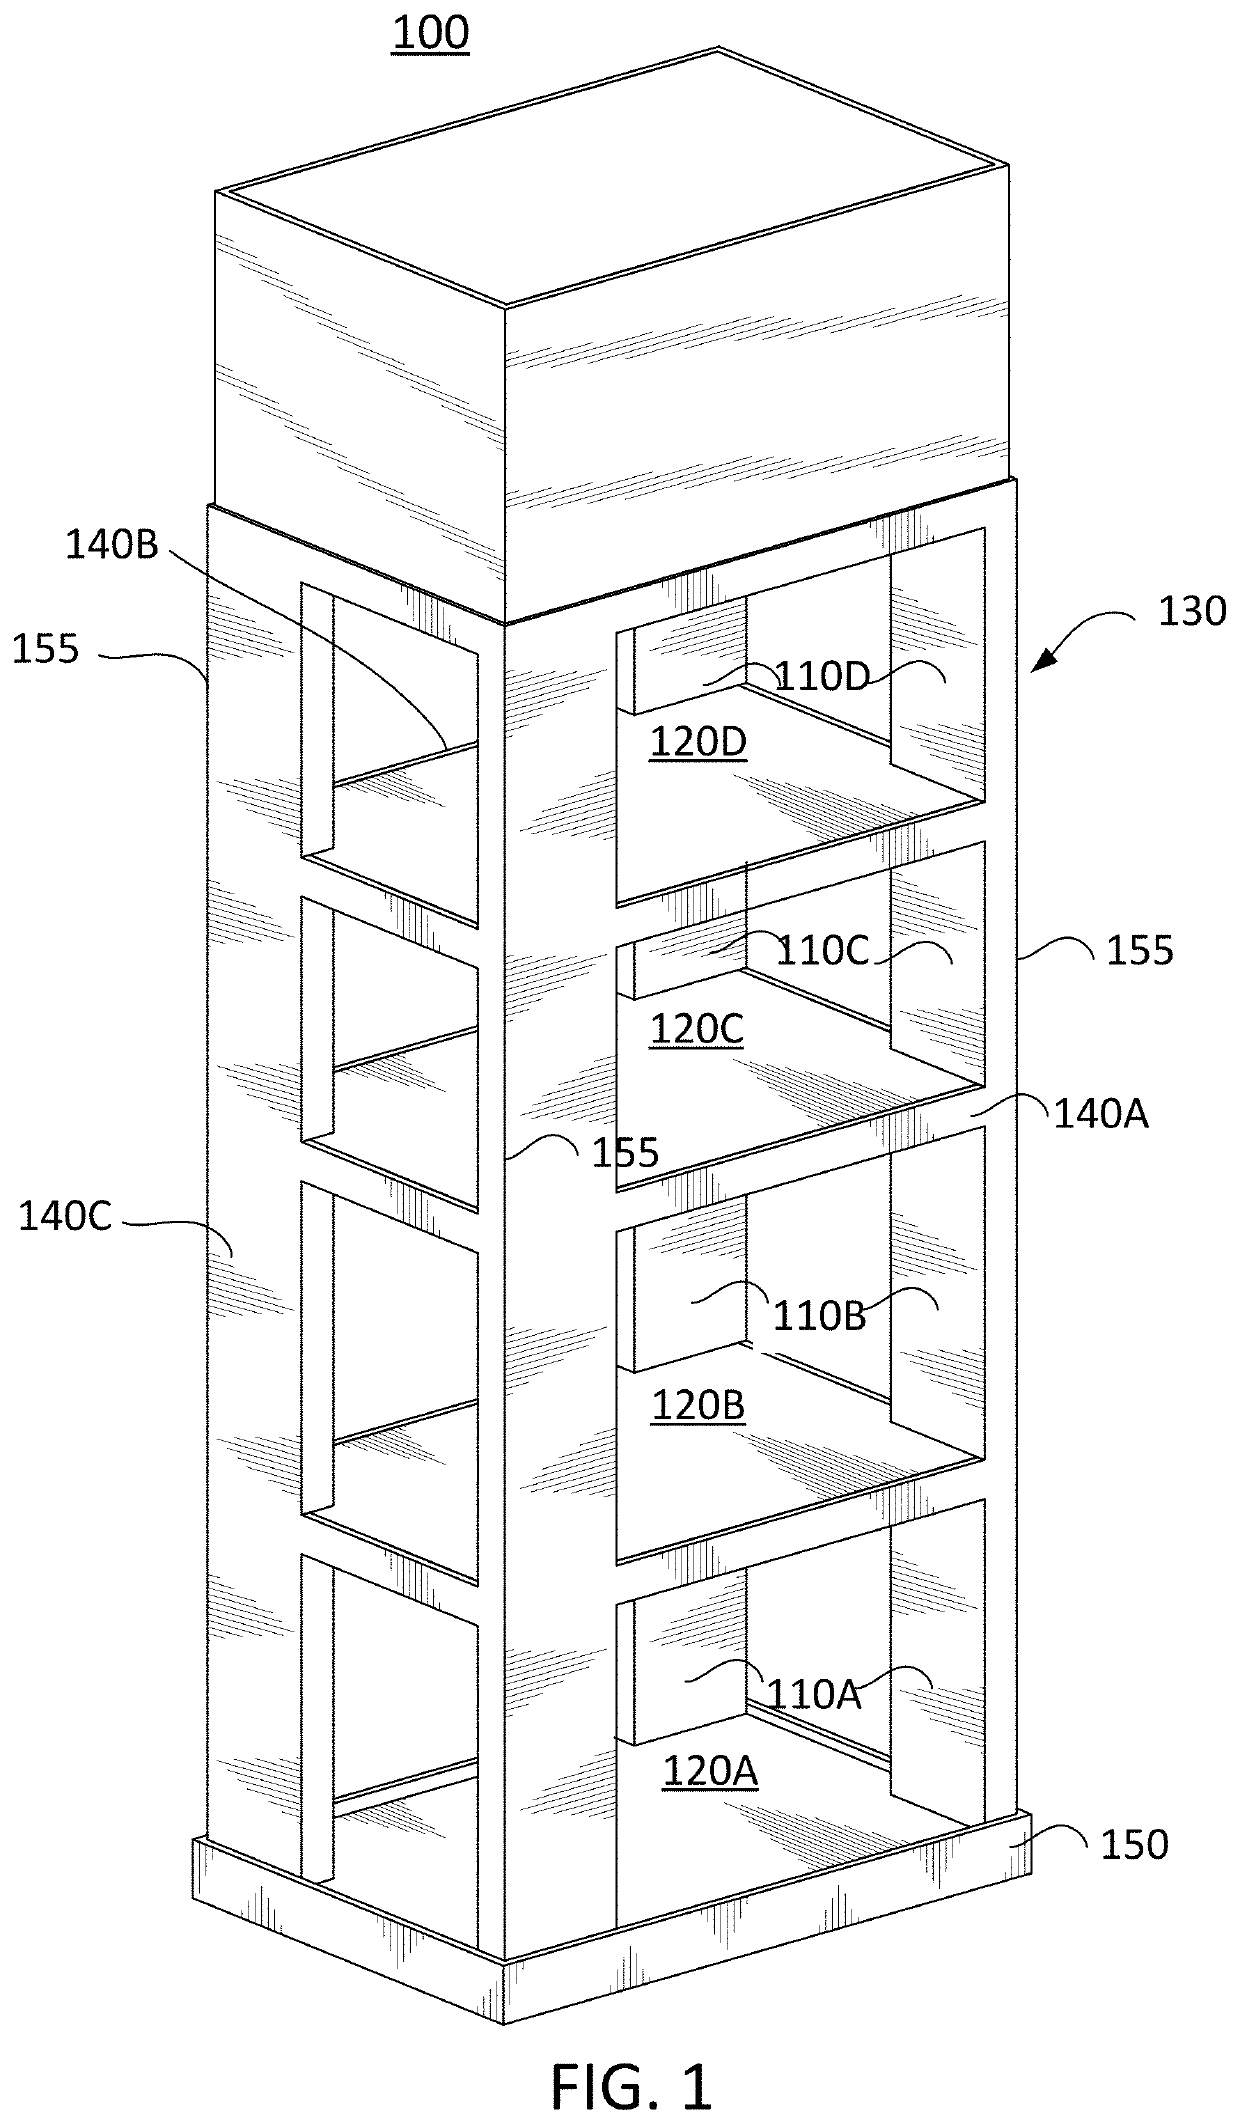 Display unit with built-in shelving supports